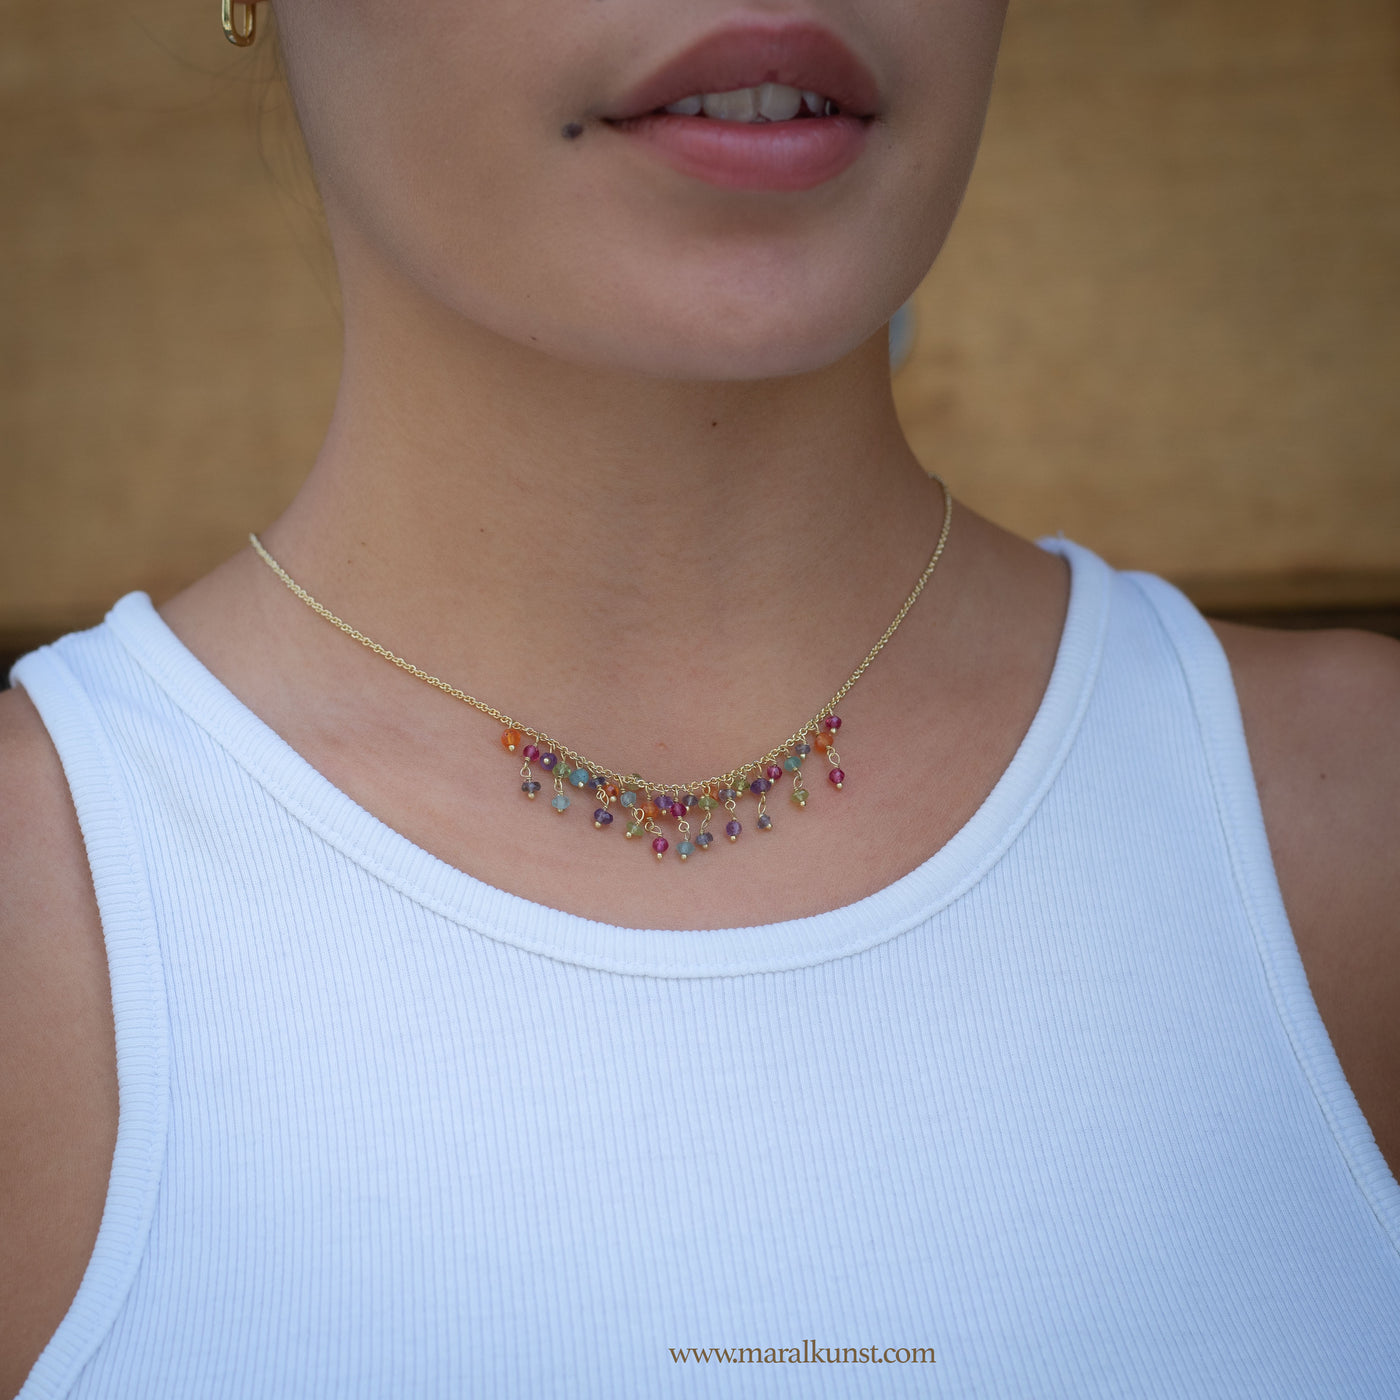 Colorful delicate necklace